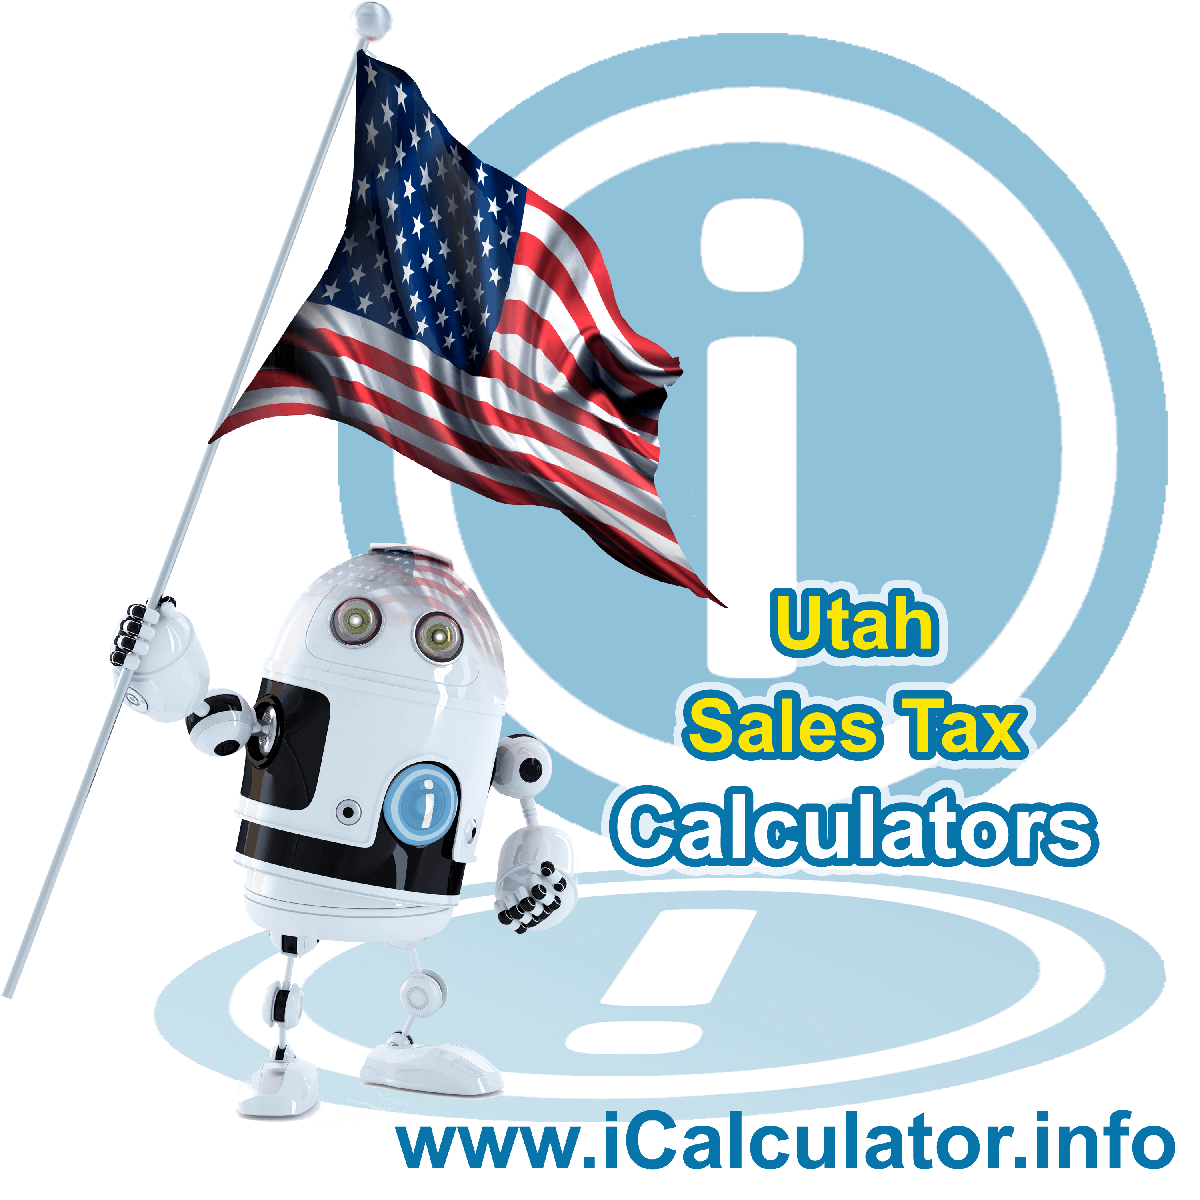 Gunnison Sales Rates: This image illustrates a calculator robot calculating Gunnison sales tax manually using the Gunnison Sales Tax Formula. You can use this information to calculate Gunnison Sales Tax manually or use the Gunnison Sales Tax Calculator to calculate sales tax online.